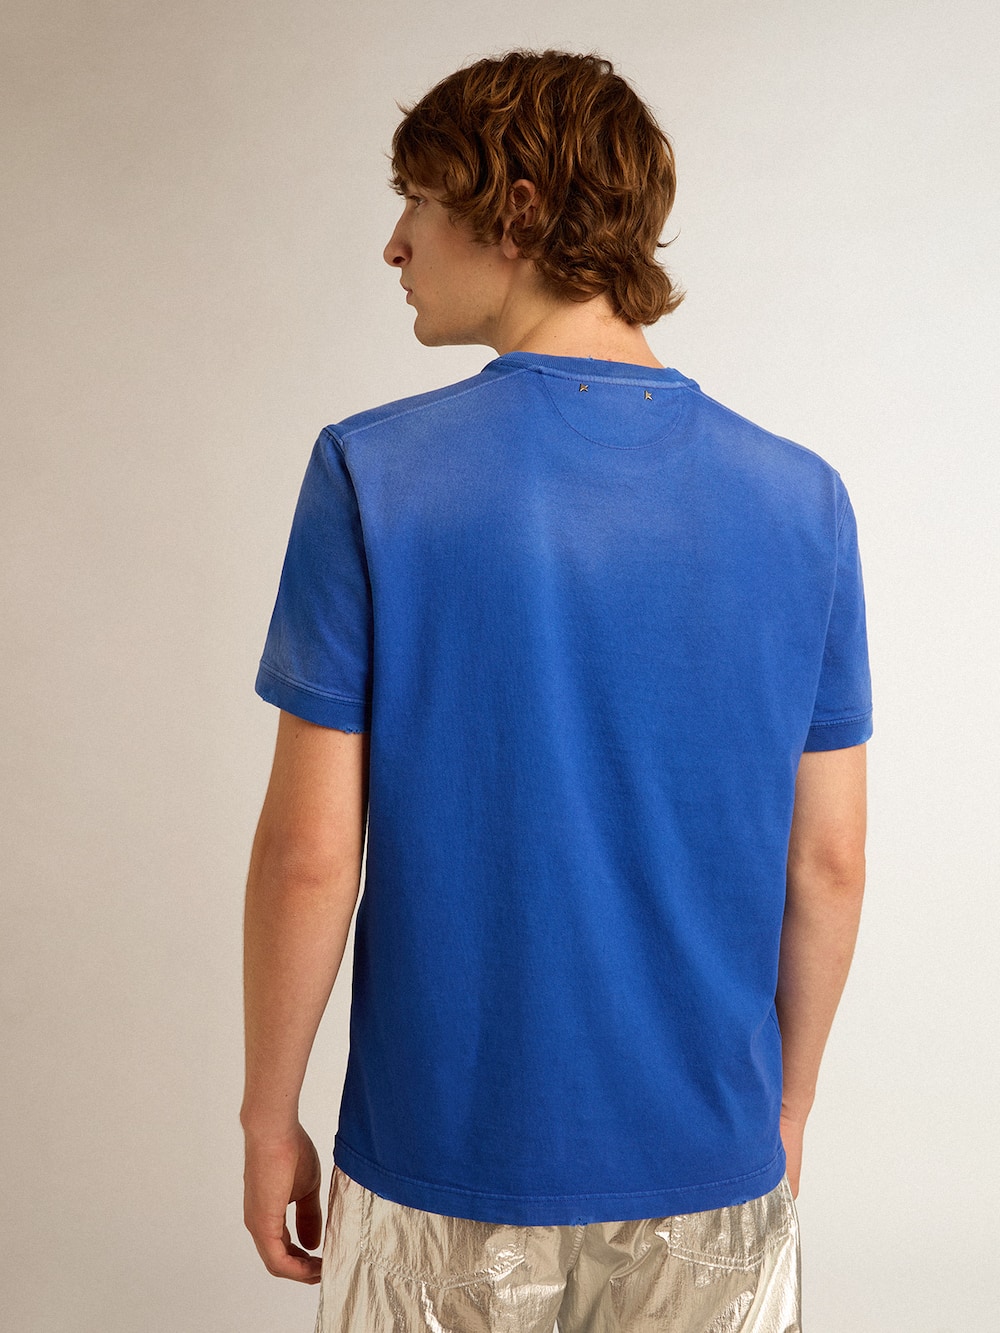 Golden Goose - Blue cotton T-shirt with Marathon poster on the front in 